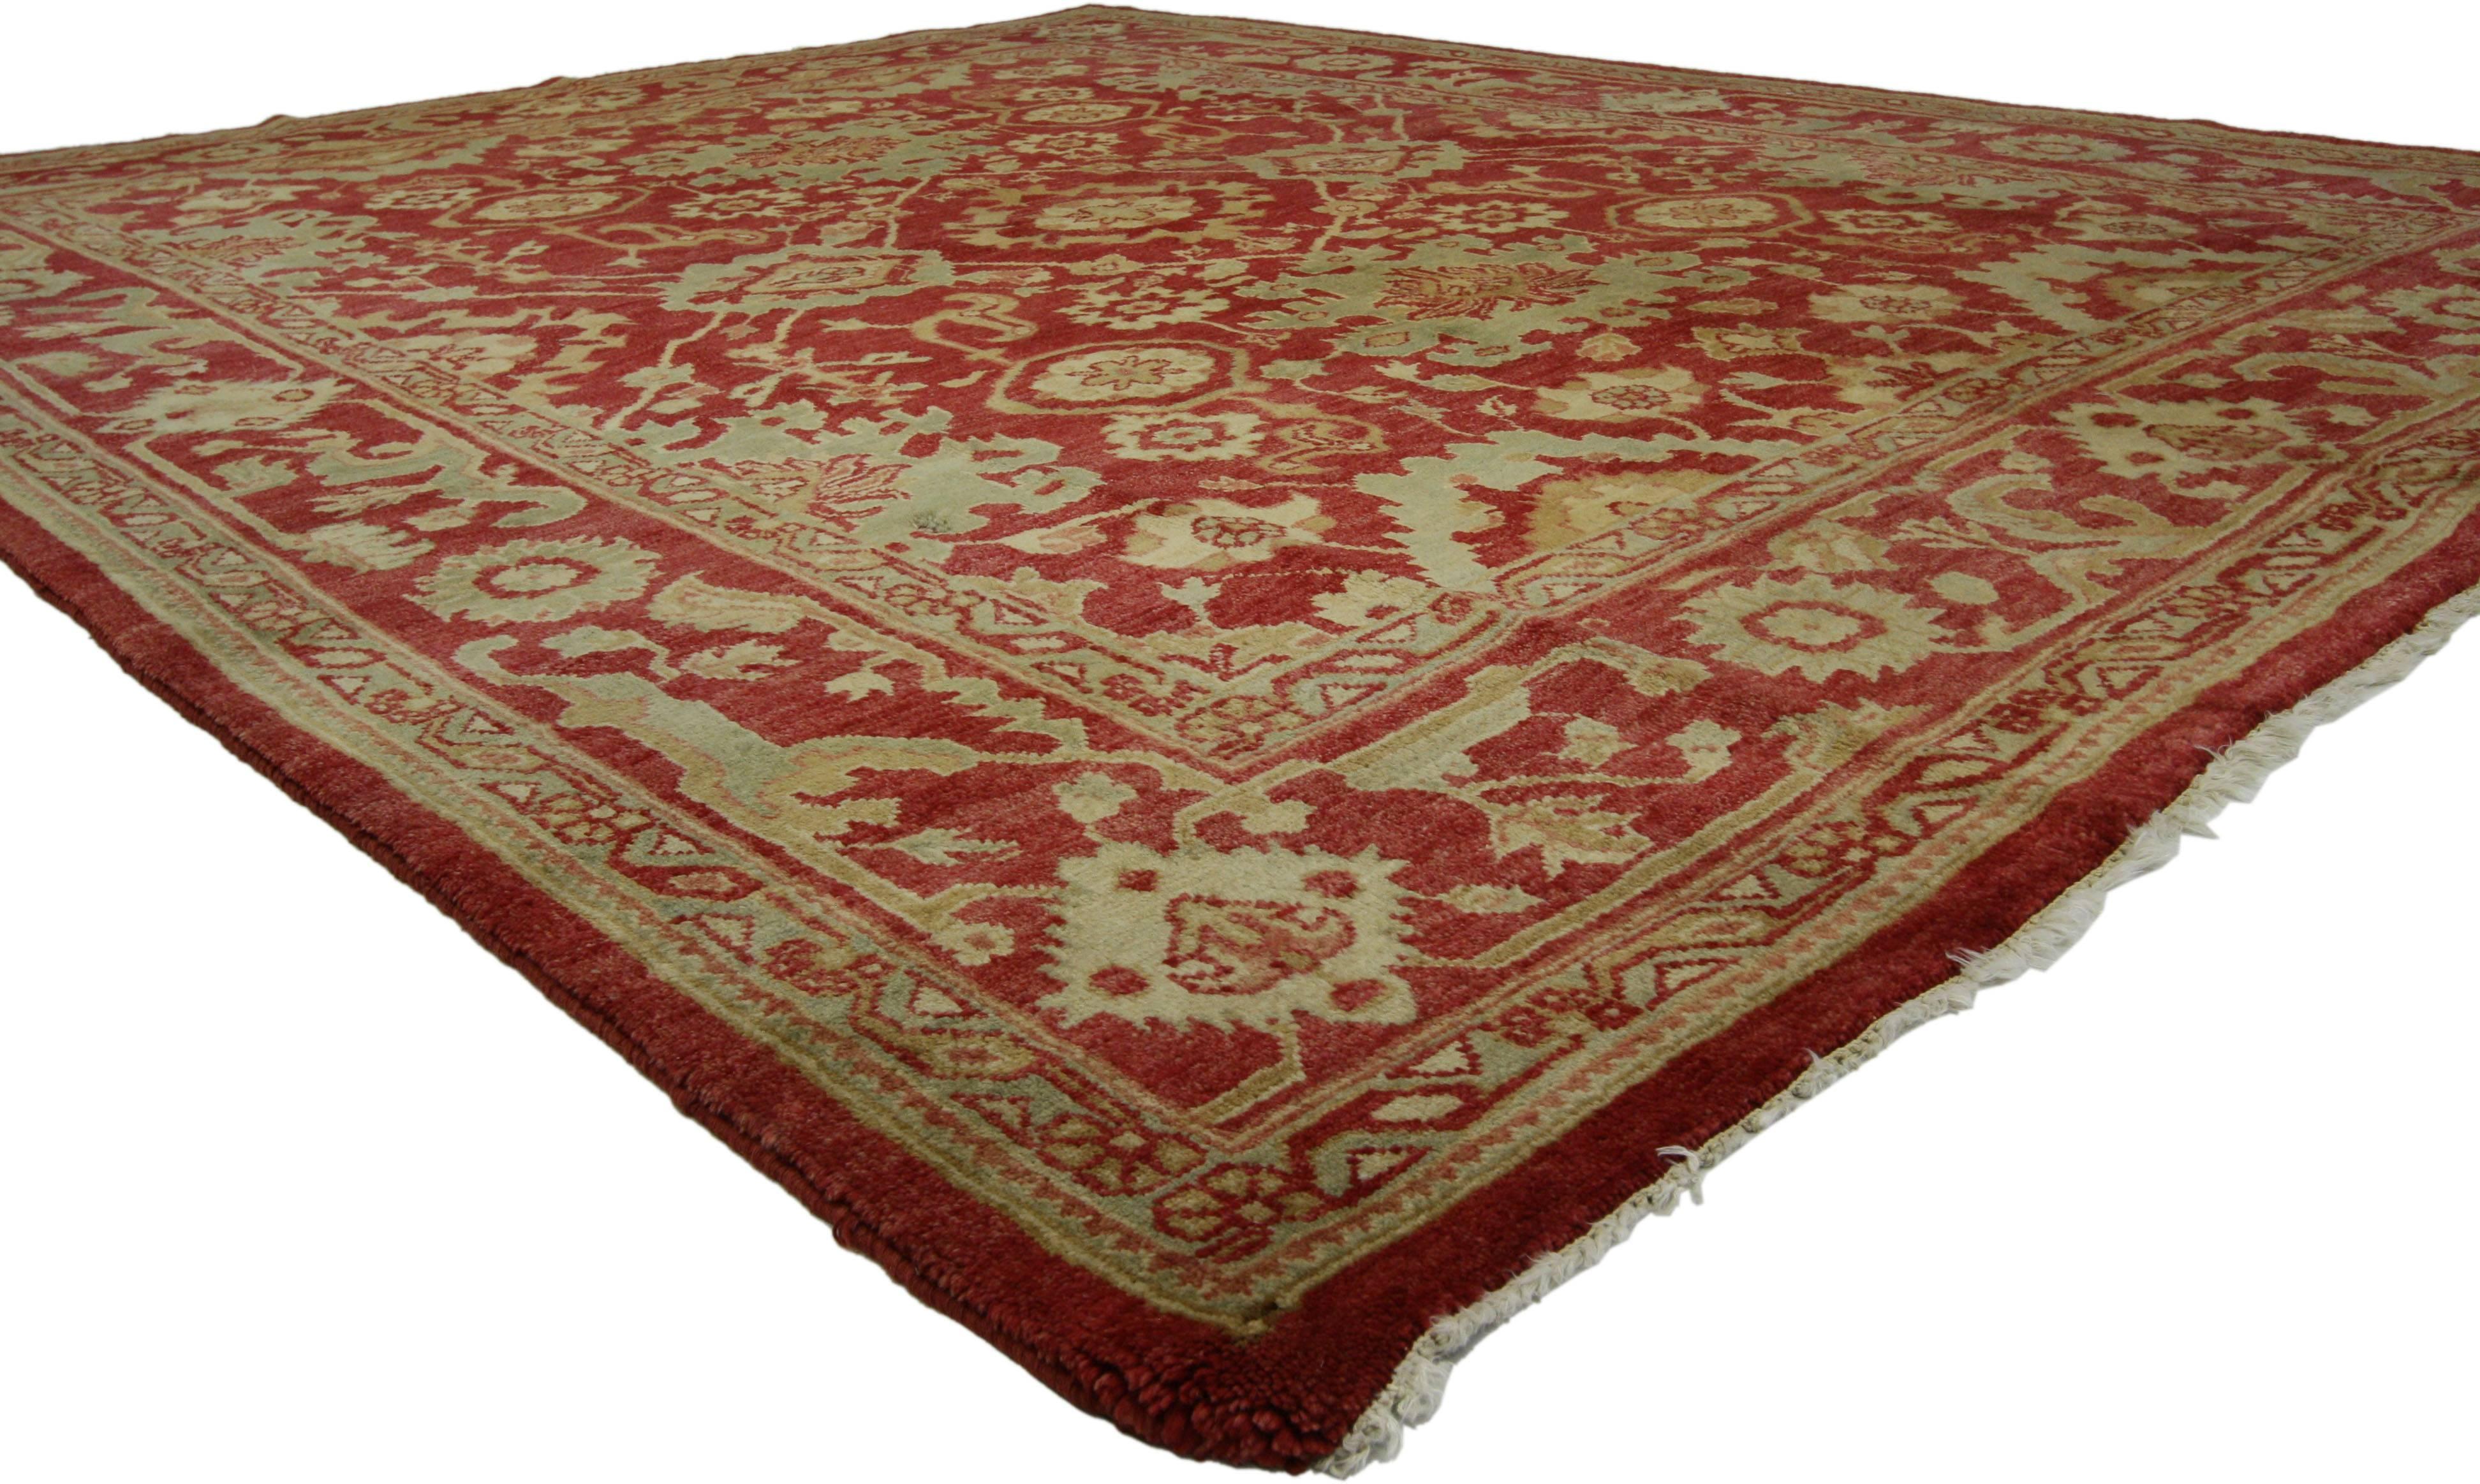 74643, vintage Turkish Oushak rug with traditional style. This hand-knotted wool vintage Turkish Oushak rug features an all-over geometric pattern composed of large scale palmette motifs connected with meandering angular vines. It is enclosed by a